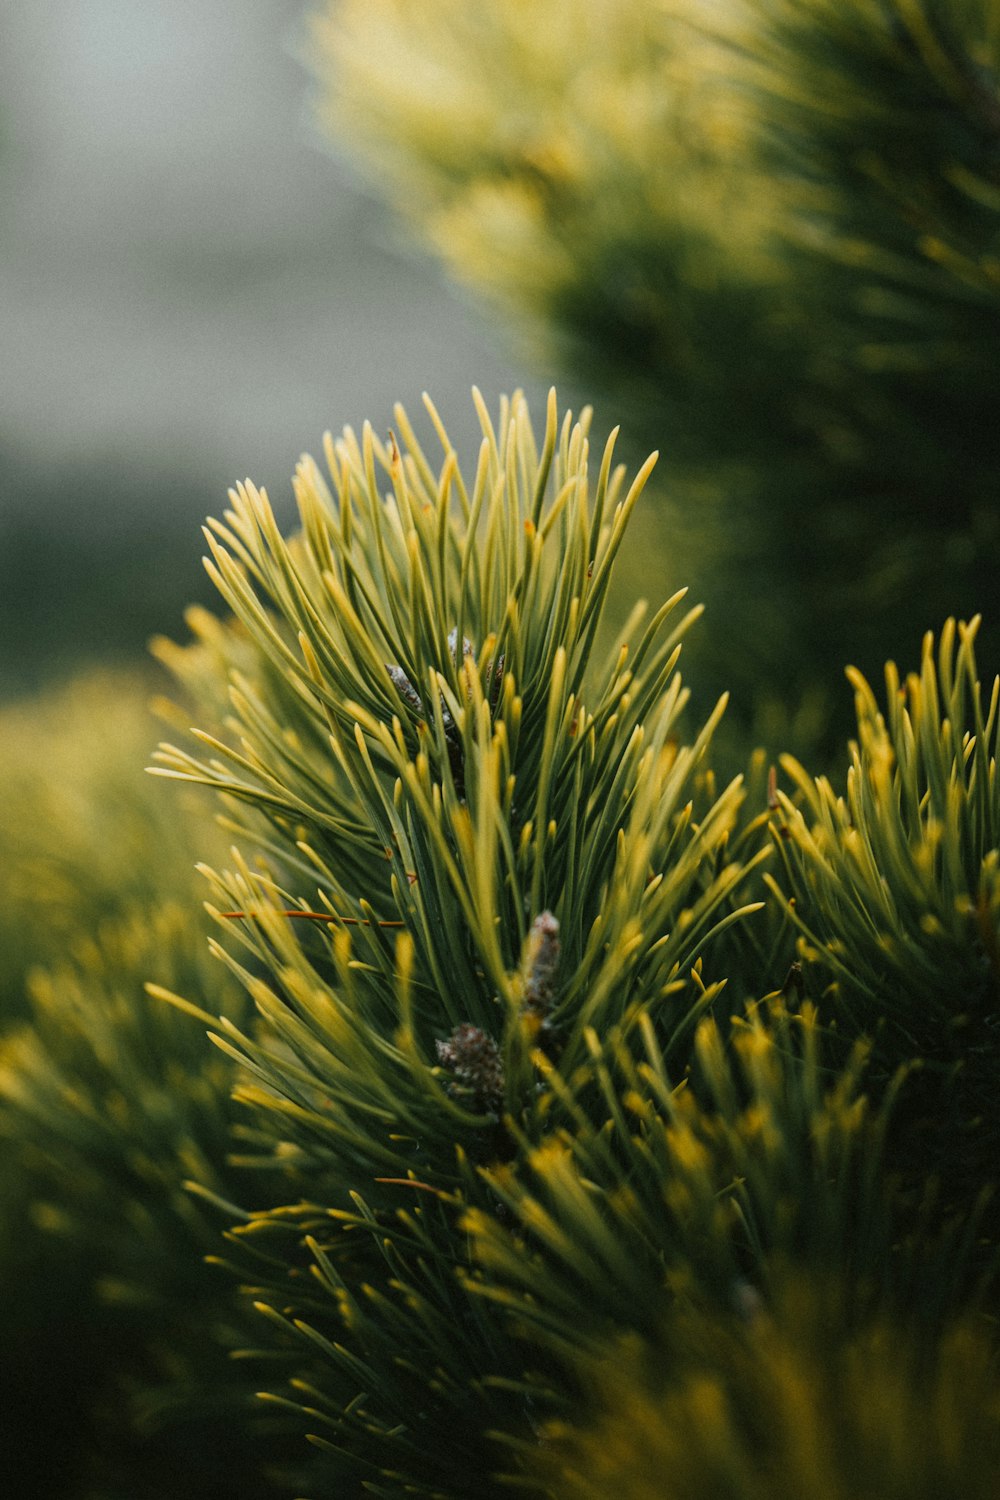 a close up of a pine tree with yellow needles